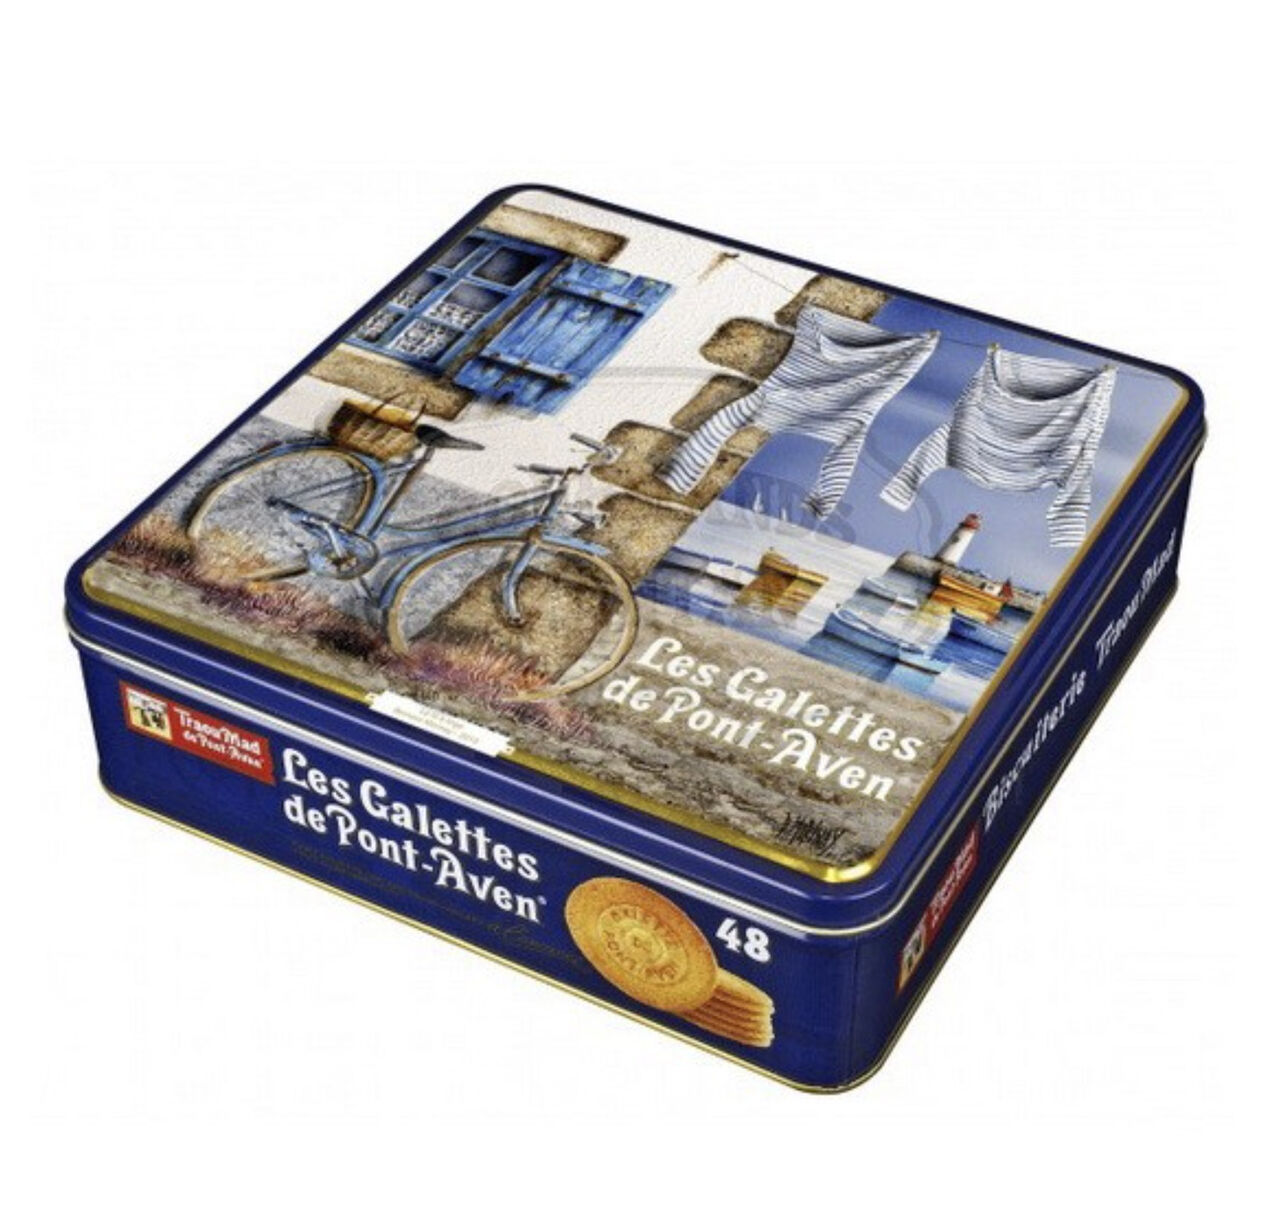 Traou Mad Galettes Tin 400g, , large image number 0